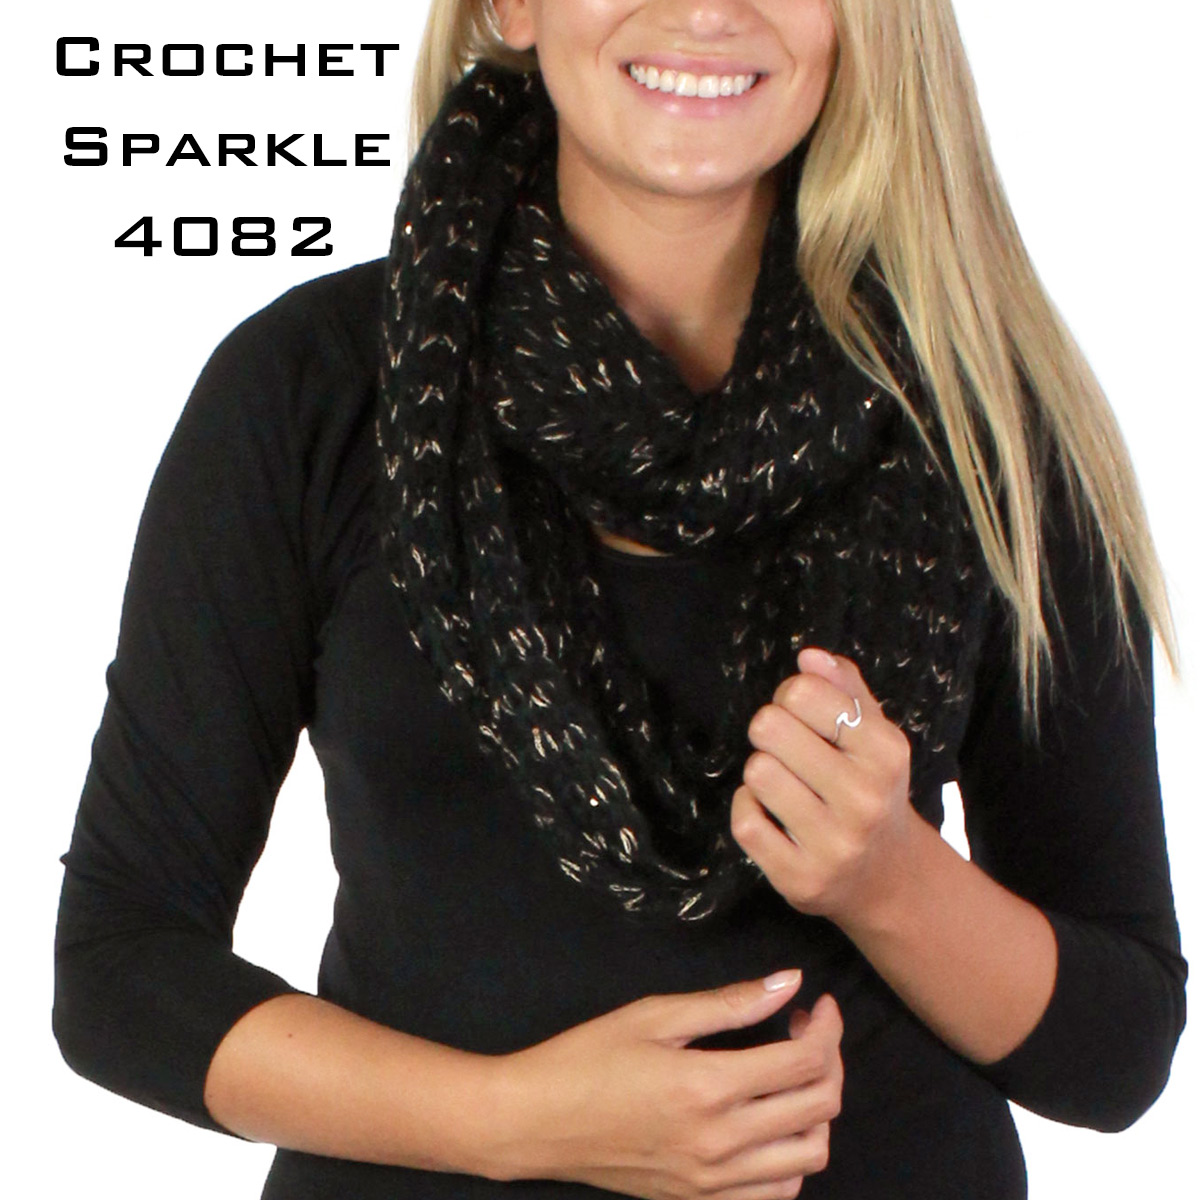 4082 BLACK/GOLD CROCHET SPARKLE Knitted Infinity Scarf